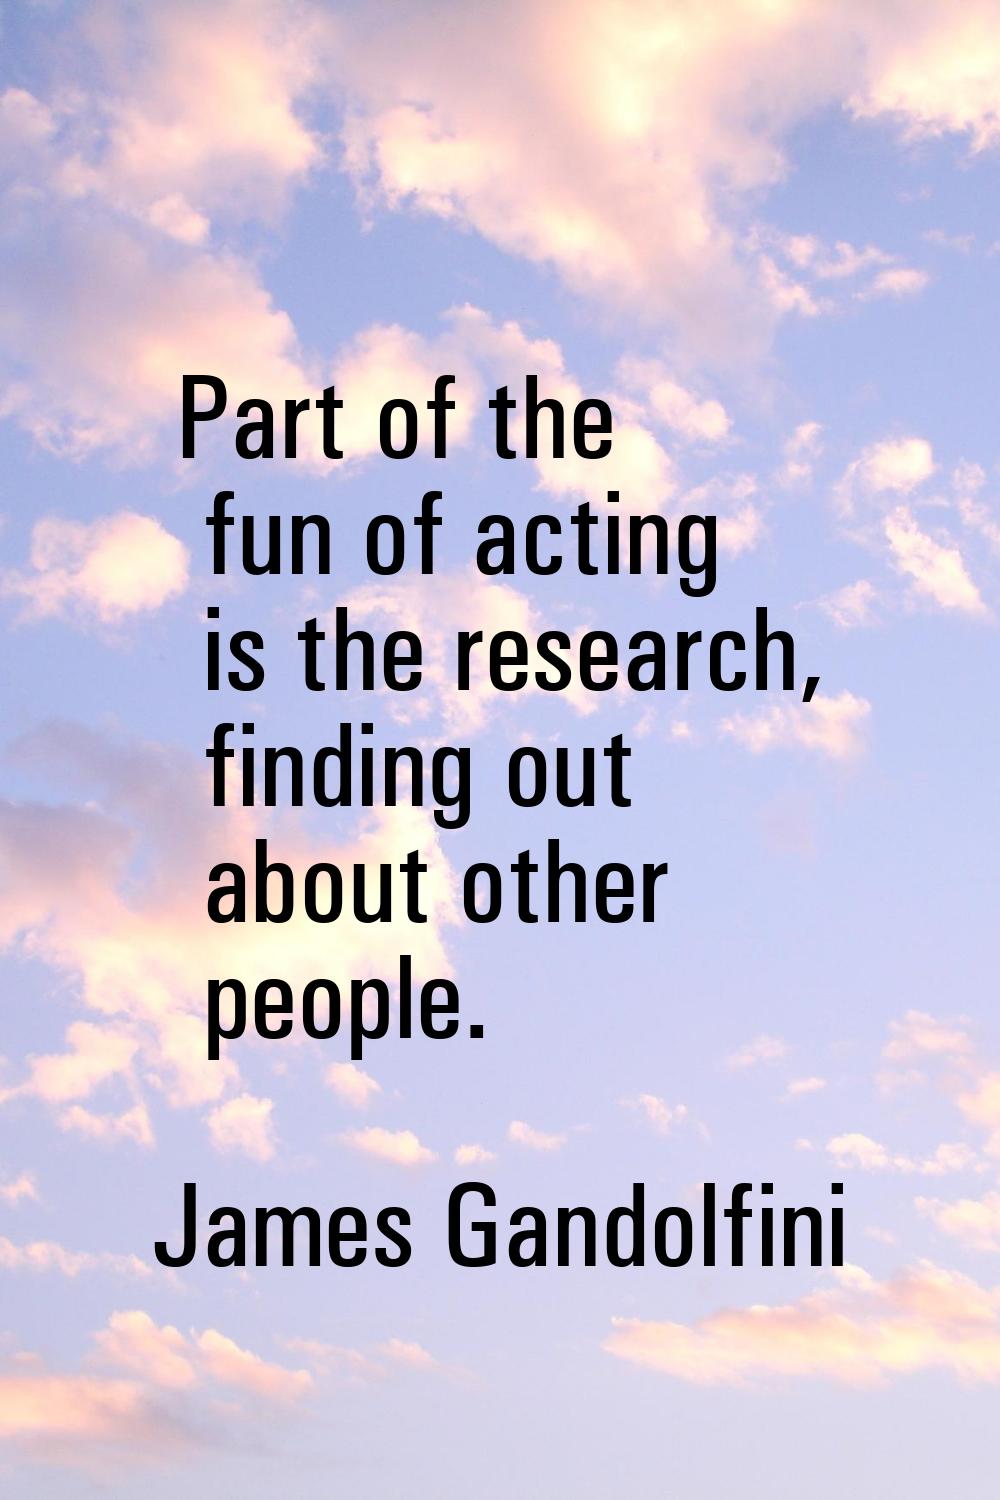 Part of the fun of acting is the research, finding out about other people.